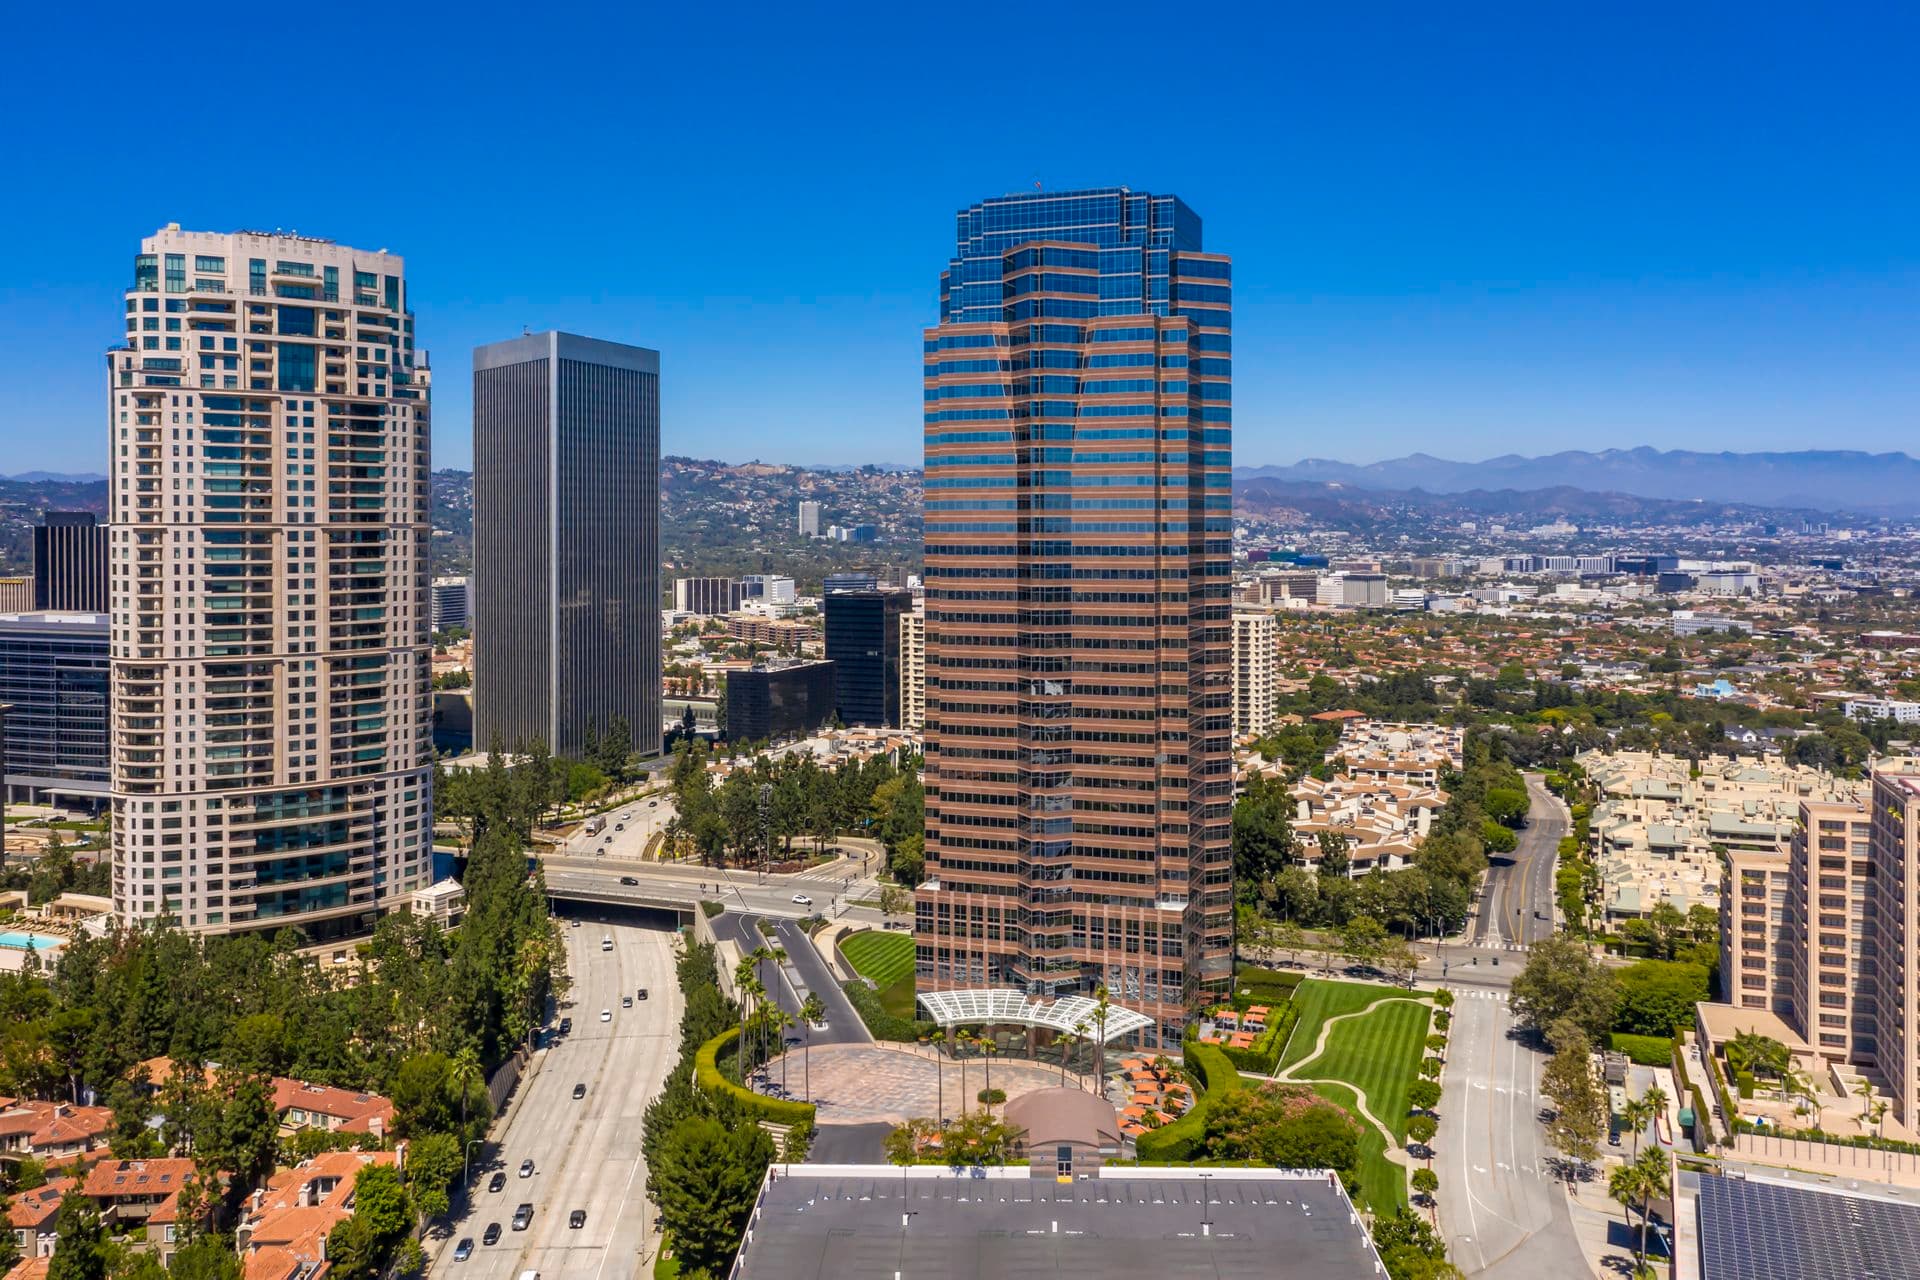 Aerial view of 2121 Avenue of the Stars Office Properties in Los Angeles, CA.